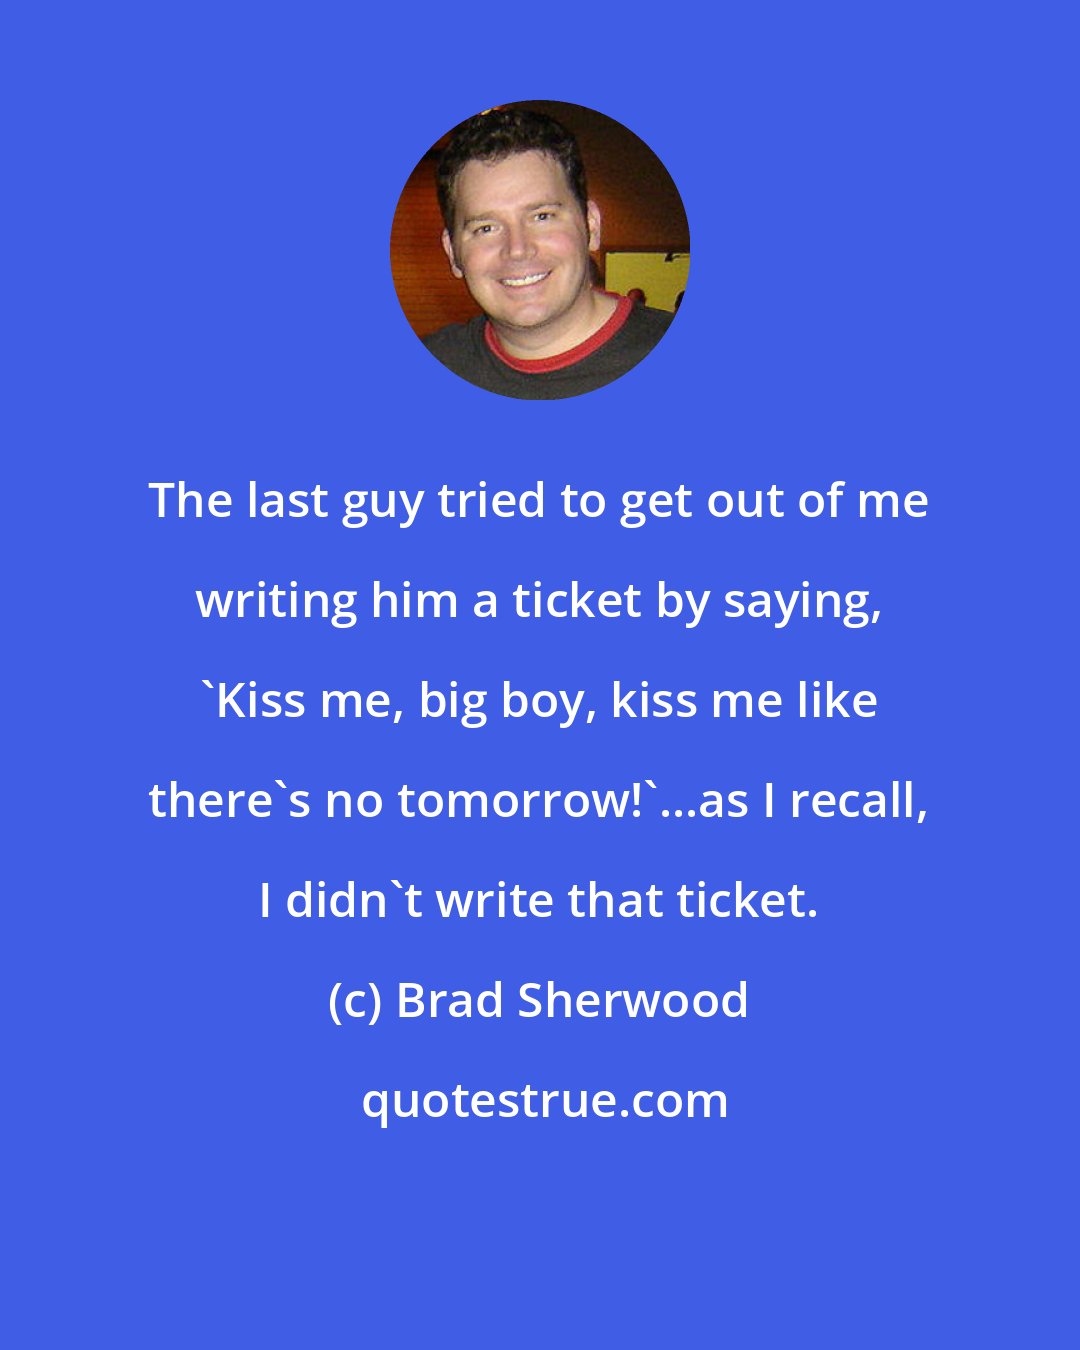 Brad Sherwood: The last guy tried to get out of me writing him a ticket by saying, 'Kiss me, big boy, kiss me like there's no tomorrow!'...as I recall, I didn't write that ticket.